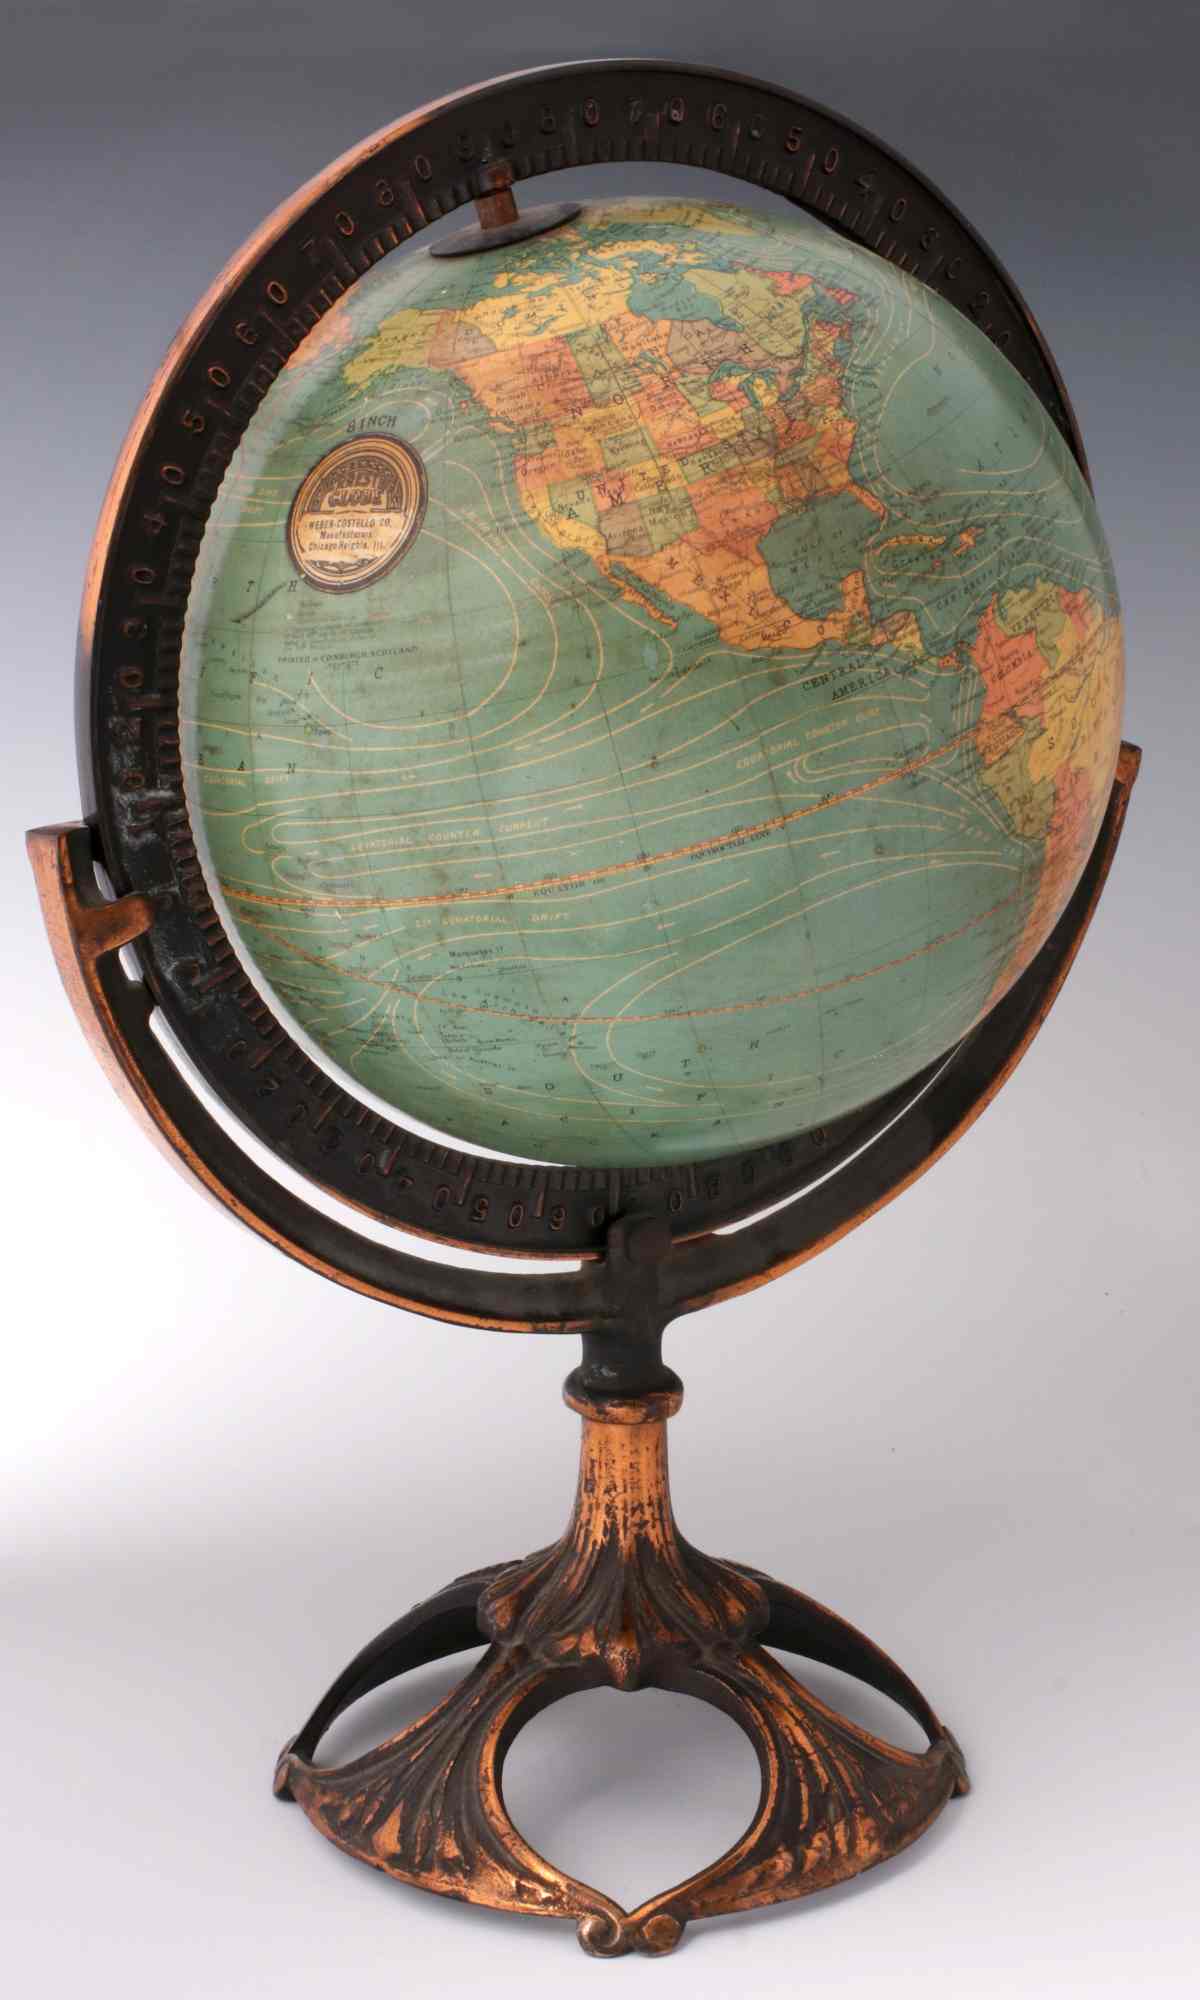 AN EARLY 20TH C. WEBER COSTELLO 8-INCH GLOBE